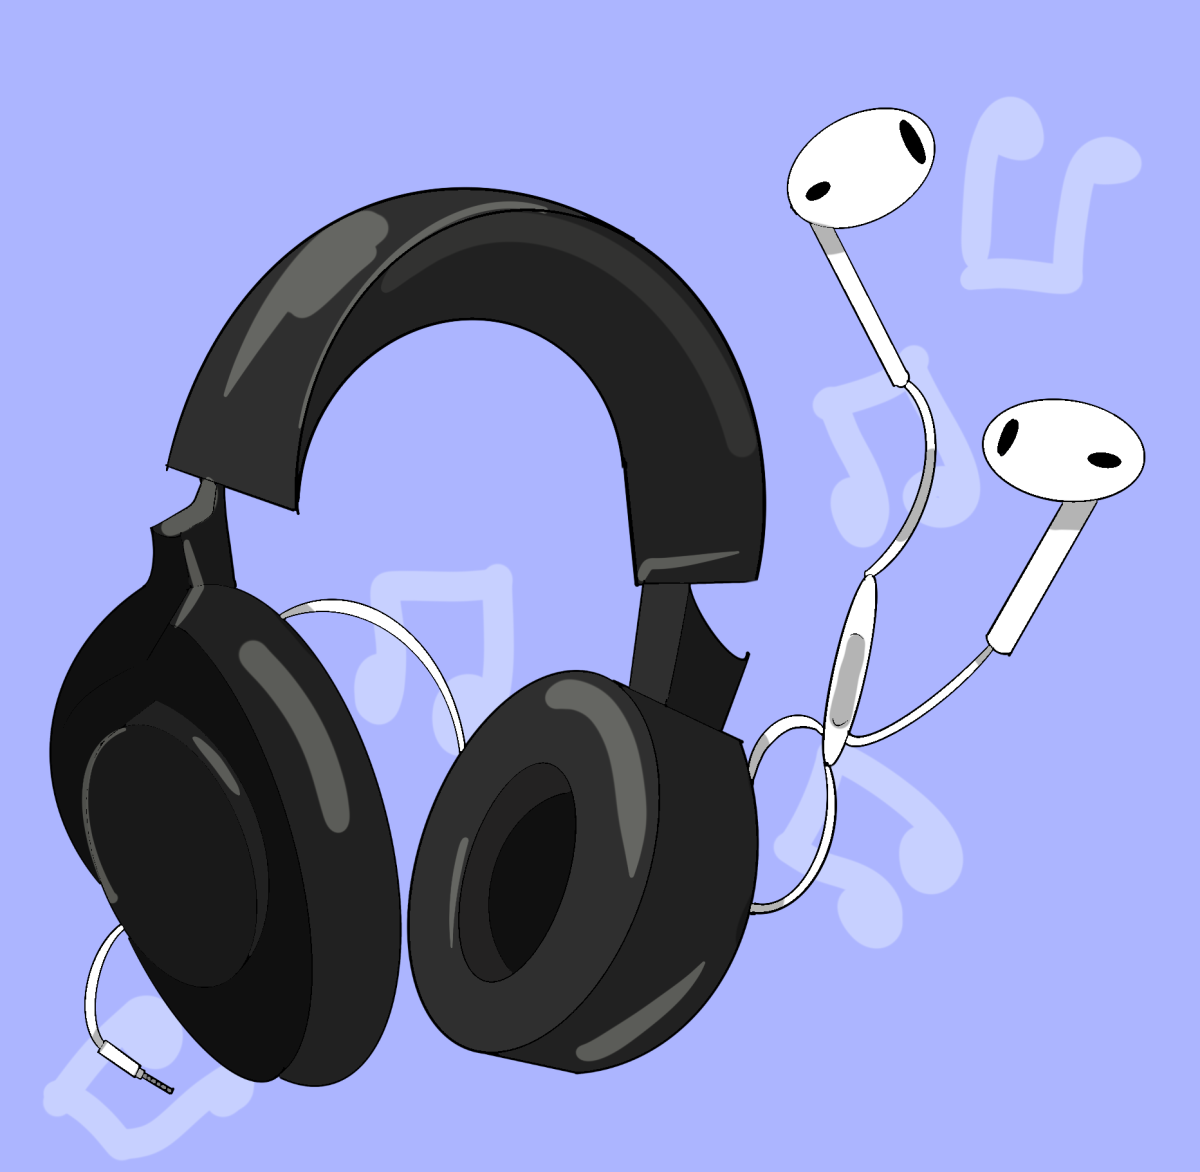 The various listening devices used by students allow them to have different listening experiences. 